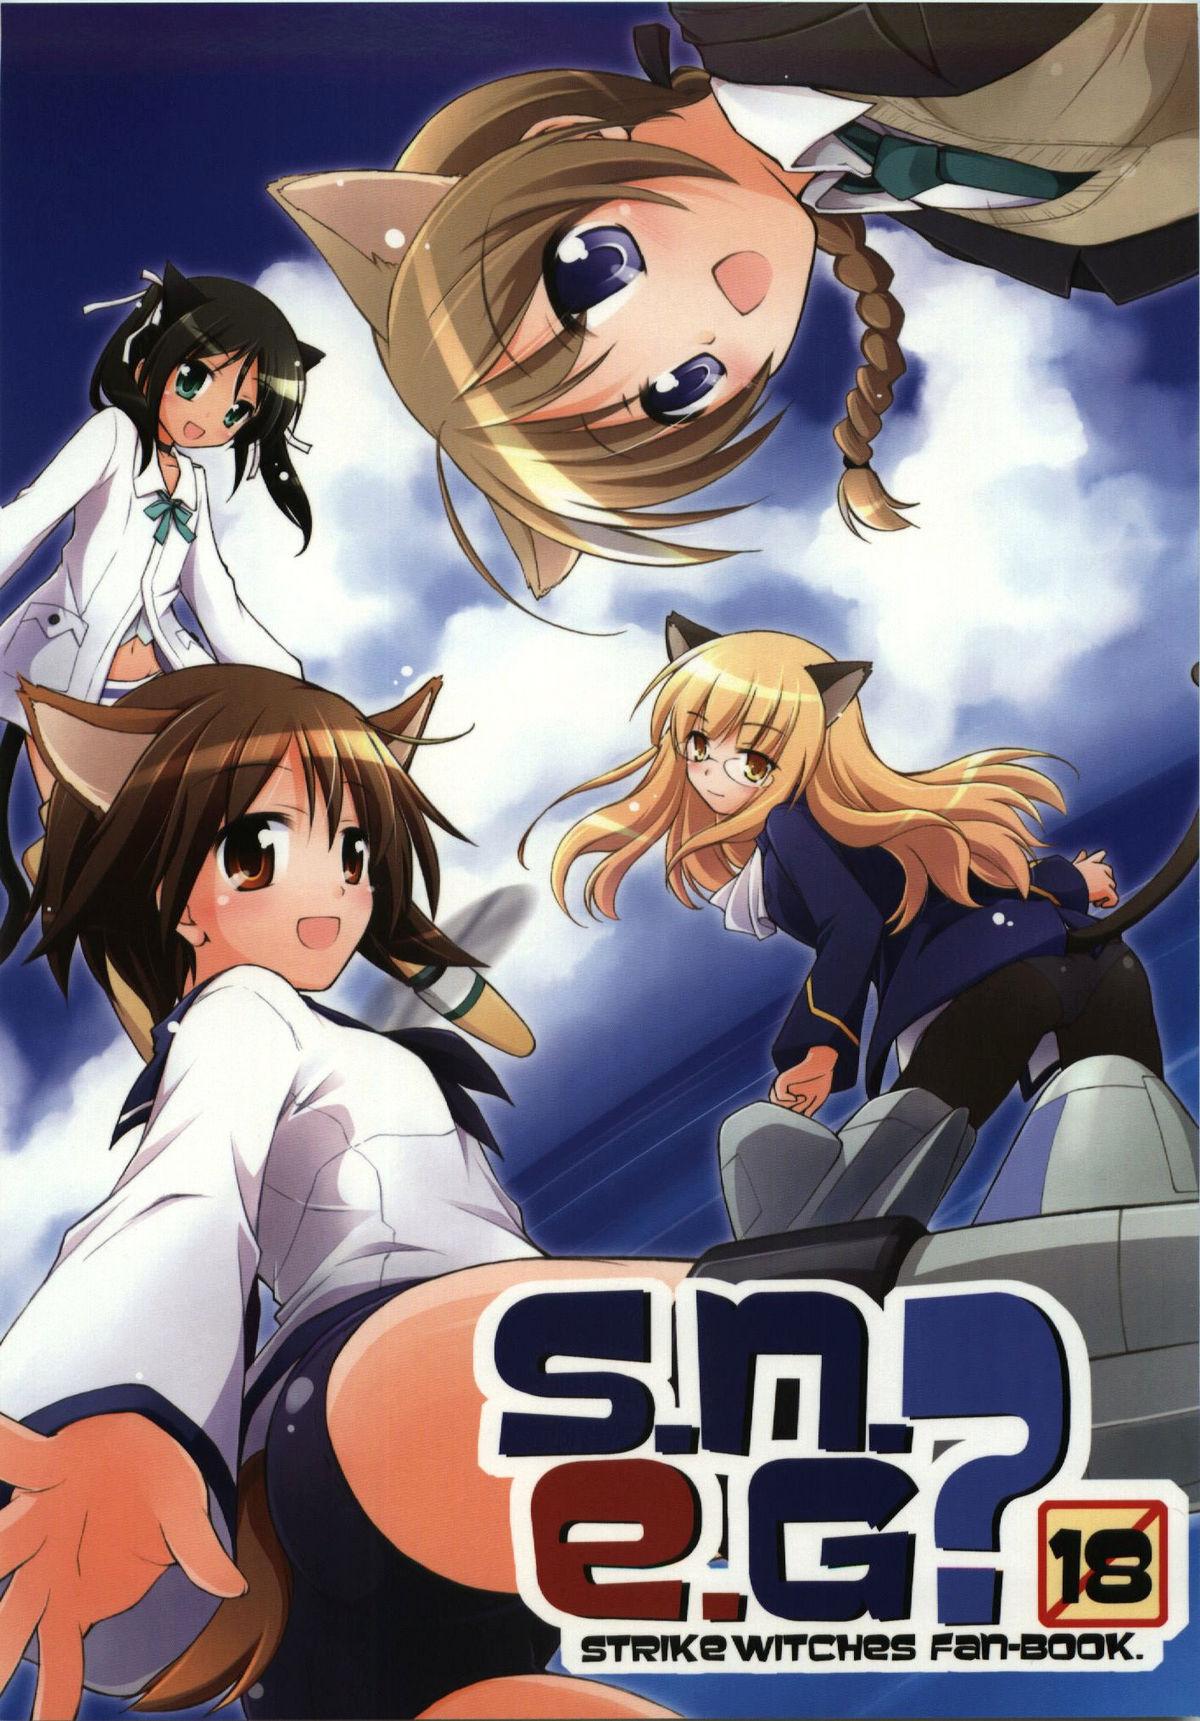 Shaking s.n.e.g? - Strike witches Prima - Page 1